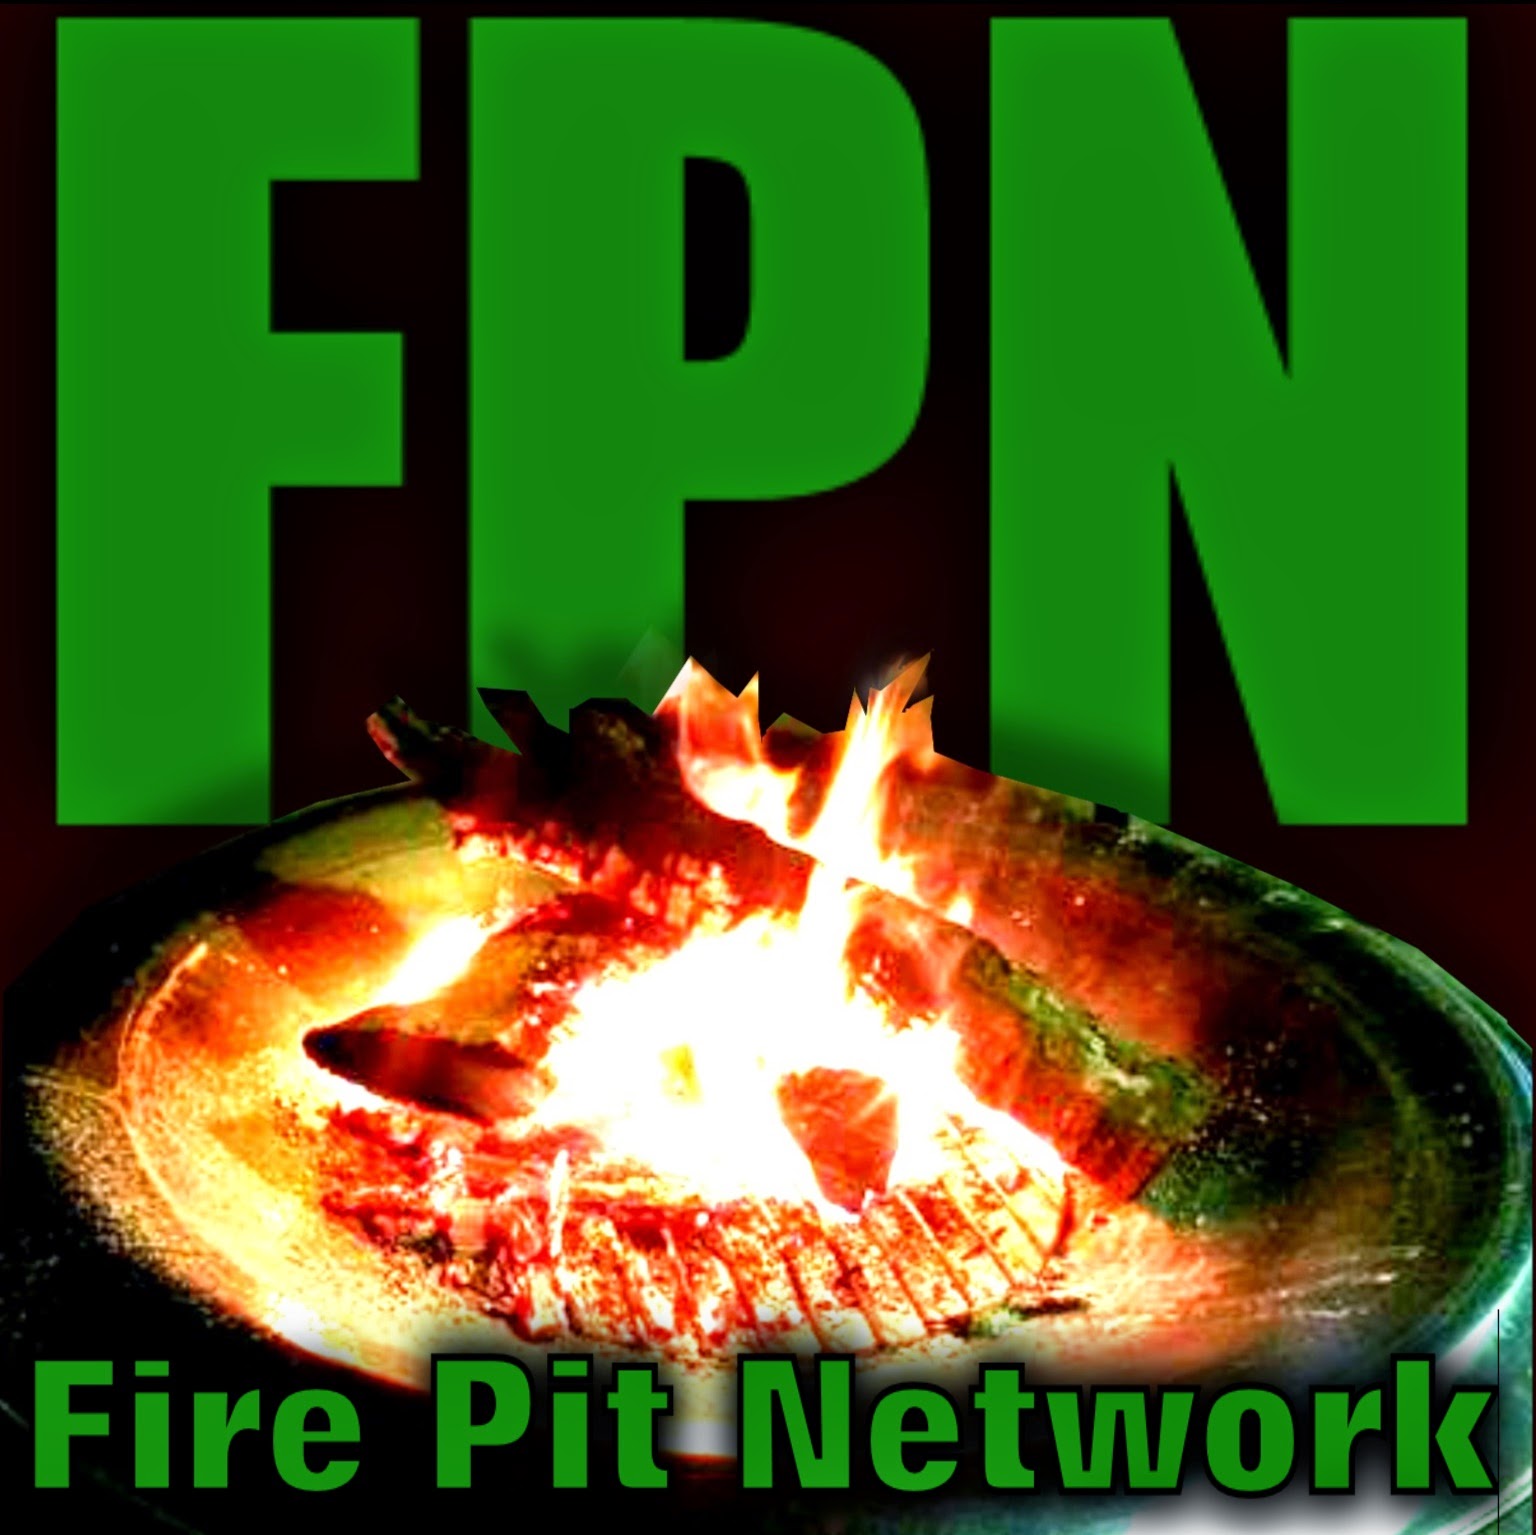 Return to Fire Pit Network Homepage